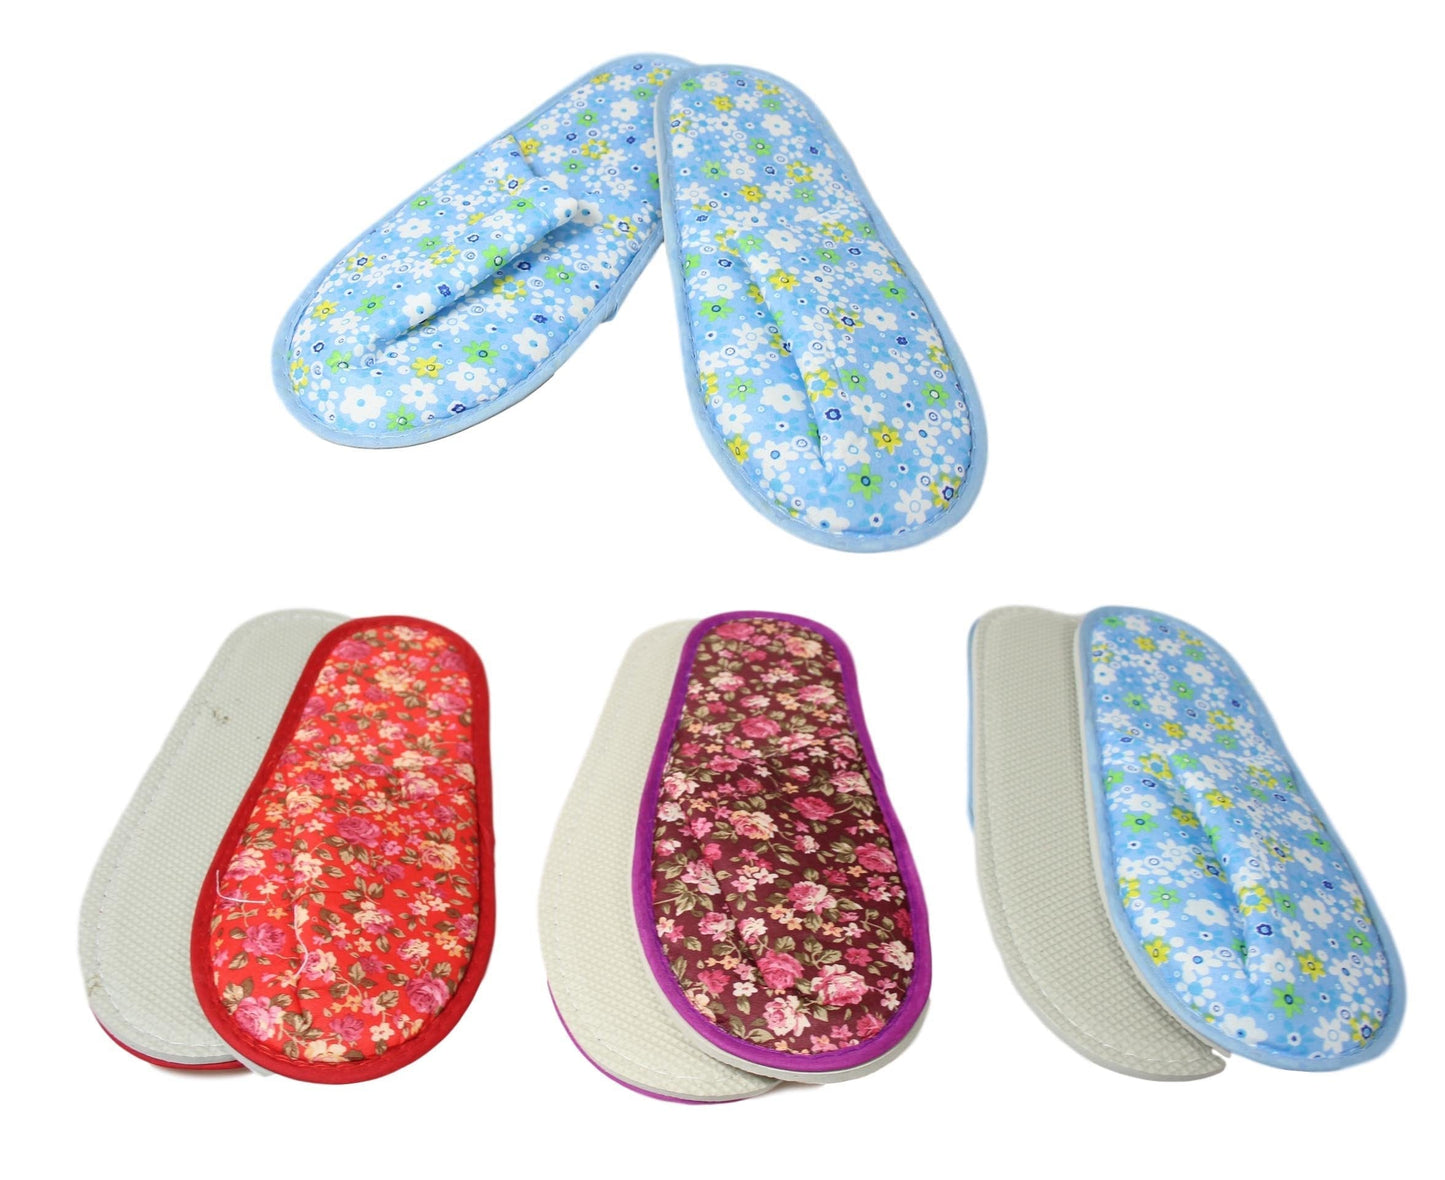 Bathroom Slippers Floral Design One Size 27 cm Assorted Colours 2279 (Large Letter Rate)